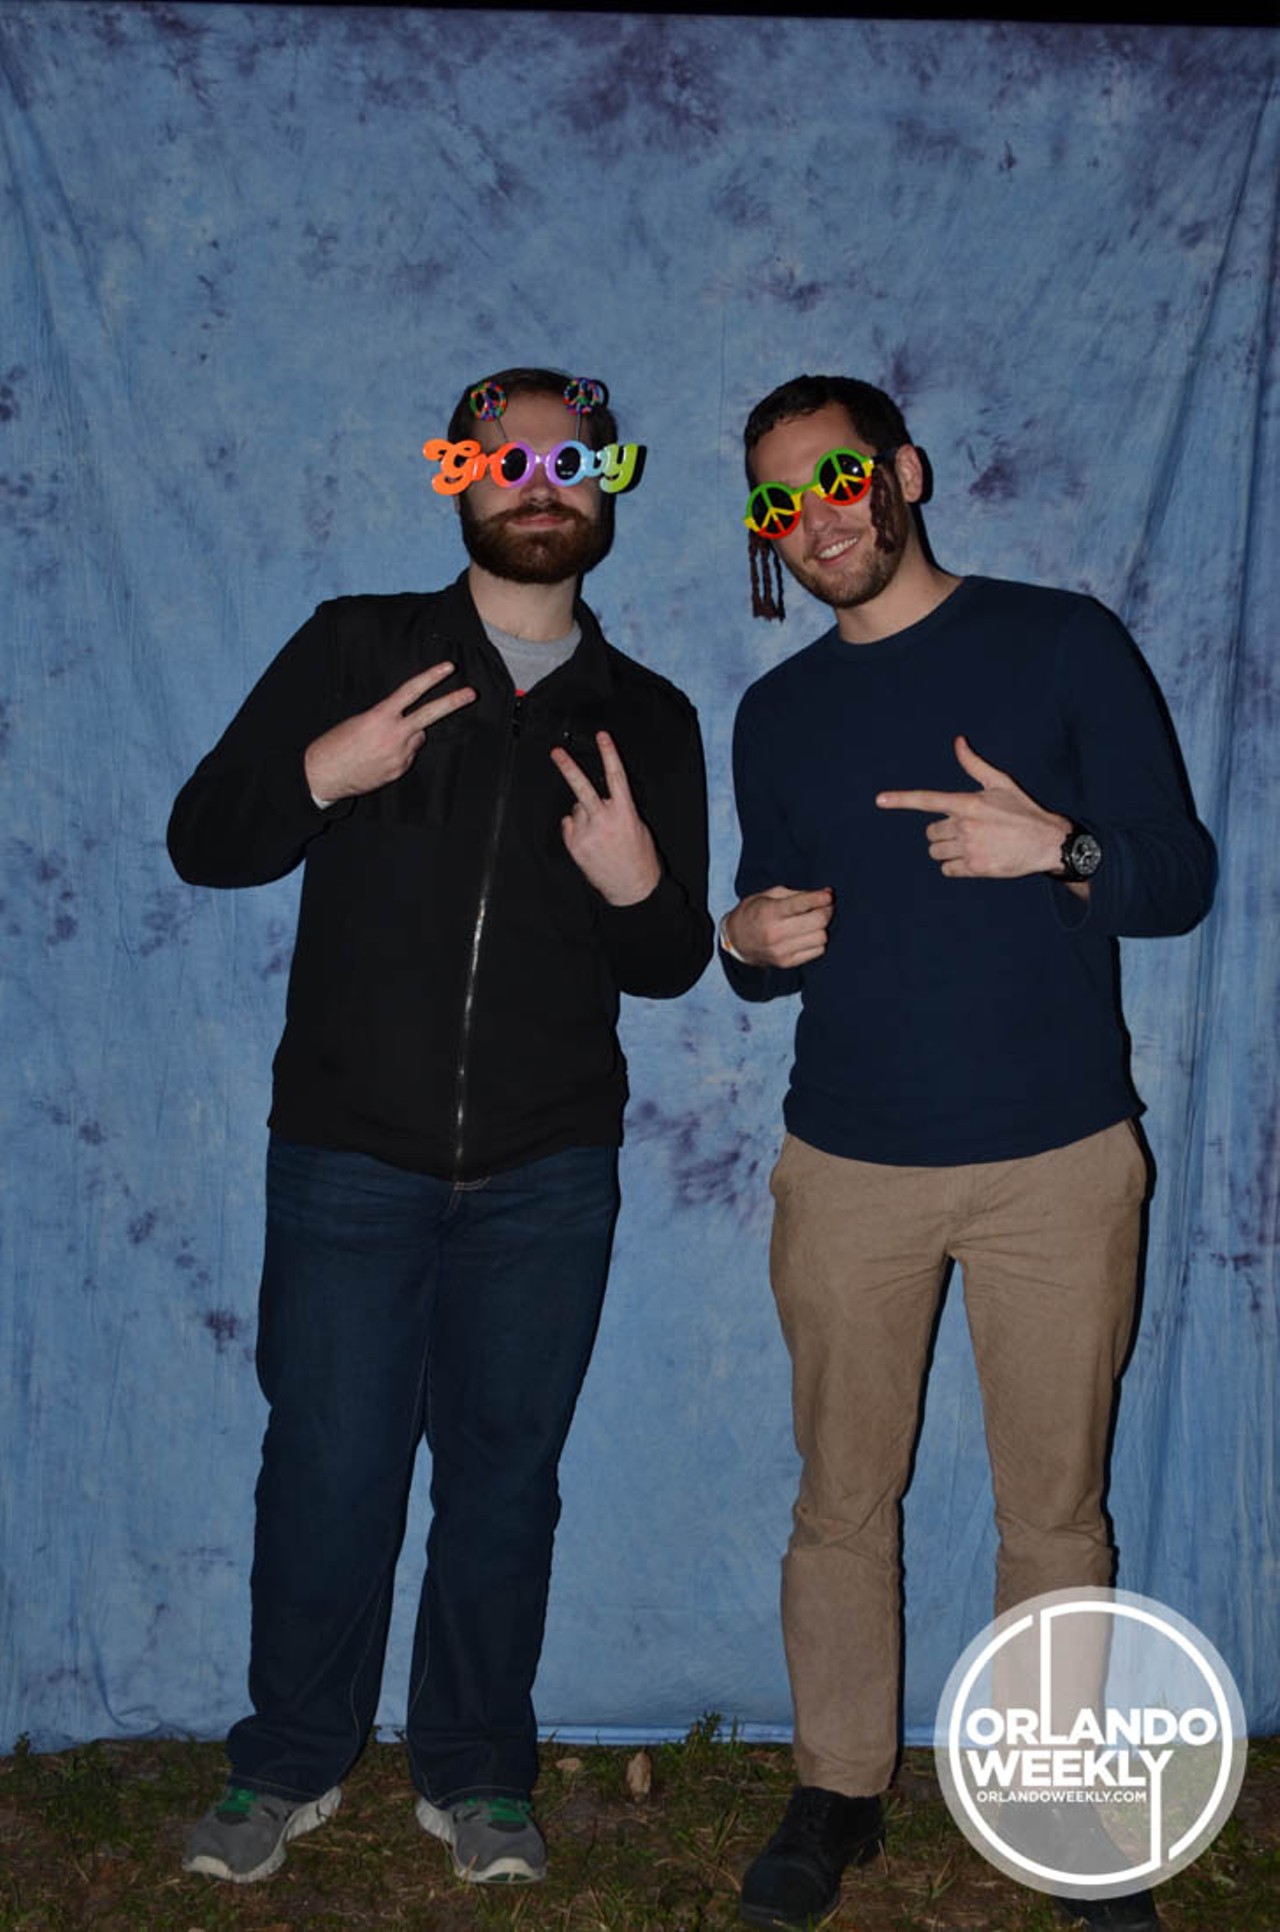 PROMO: Groovy photos from the Red Lenz Photography booth at Drink Around The Hood